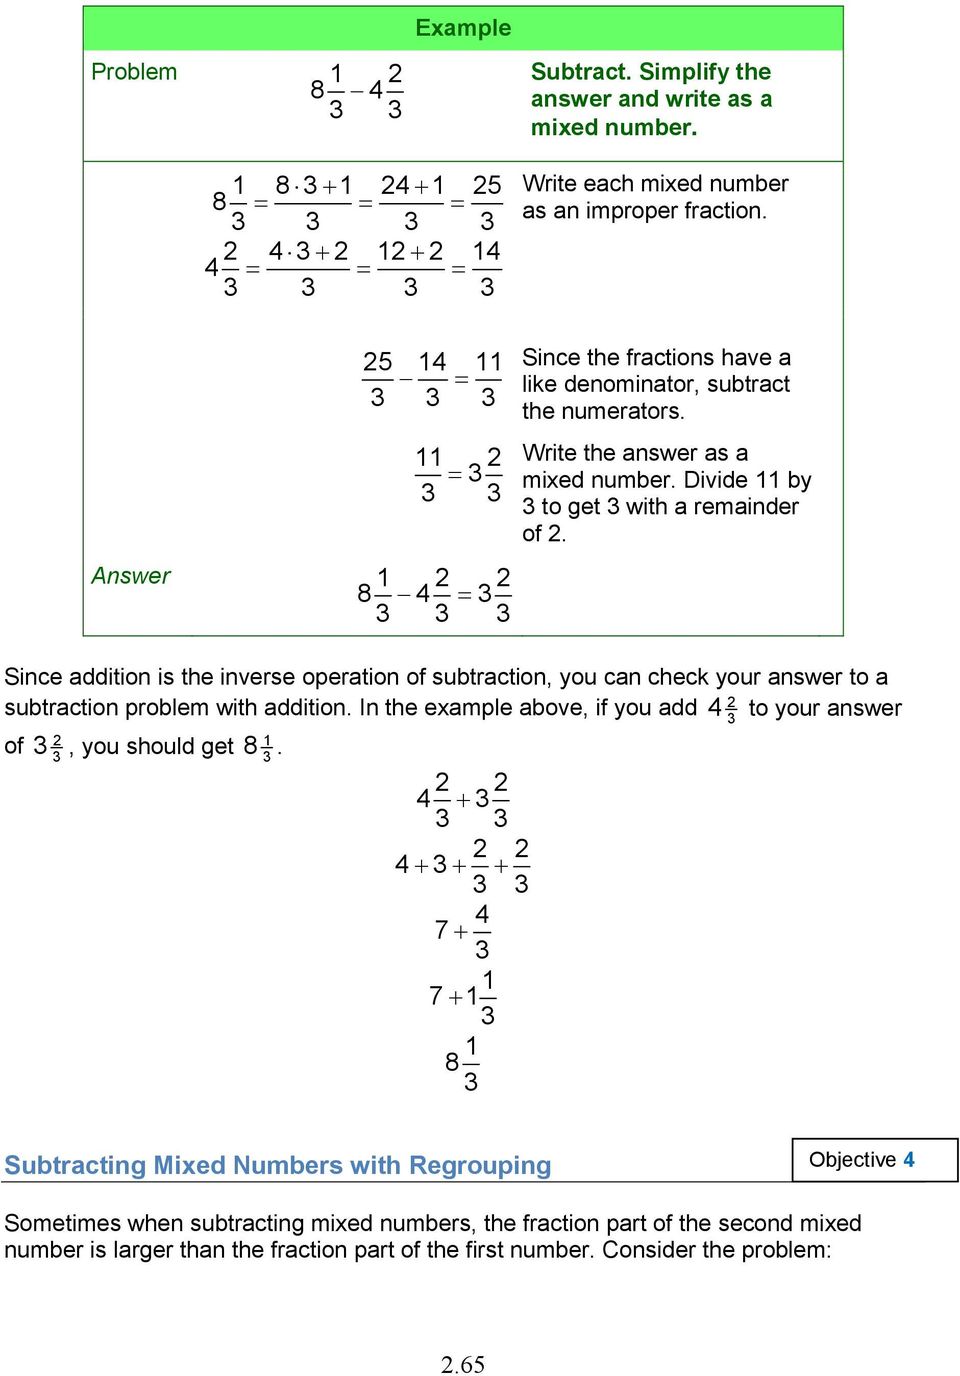 Since addition is the inverse operation of subtraction, you can check your answer to a 2 subtraction problem with addition.